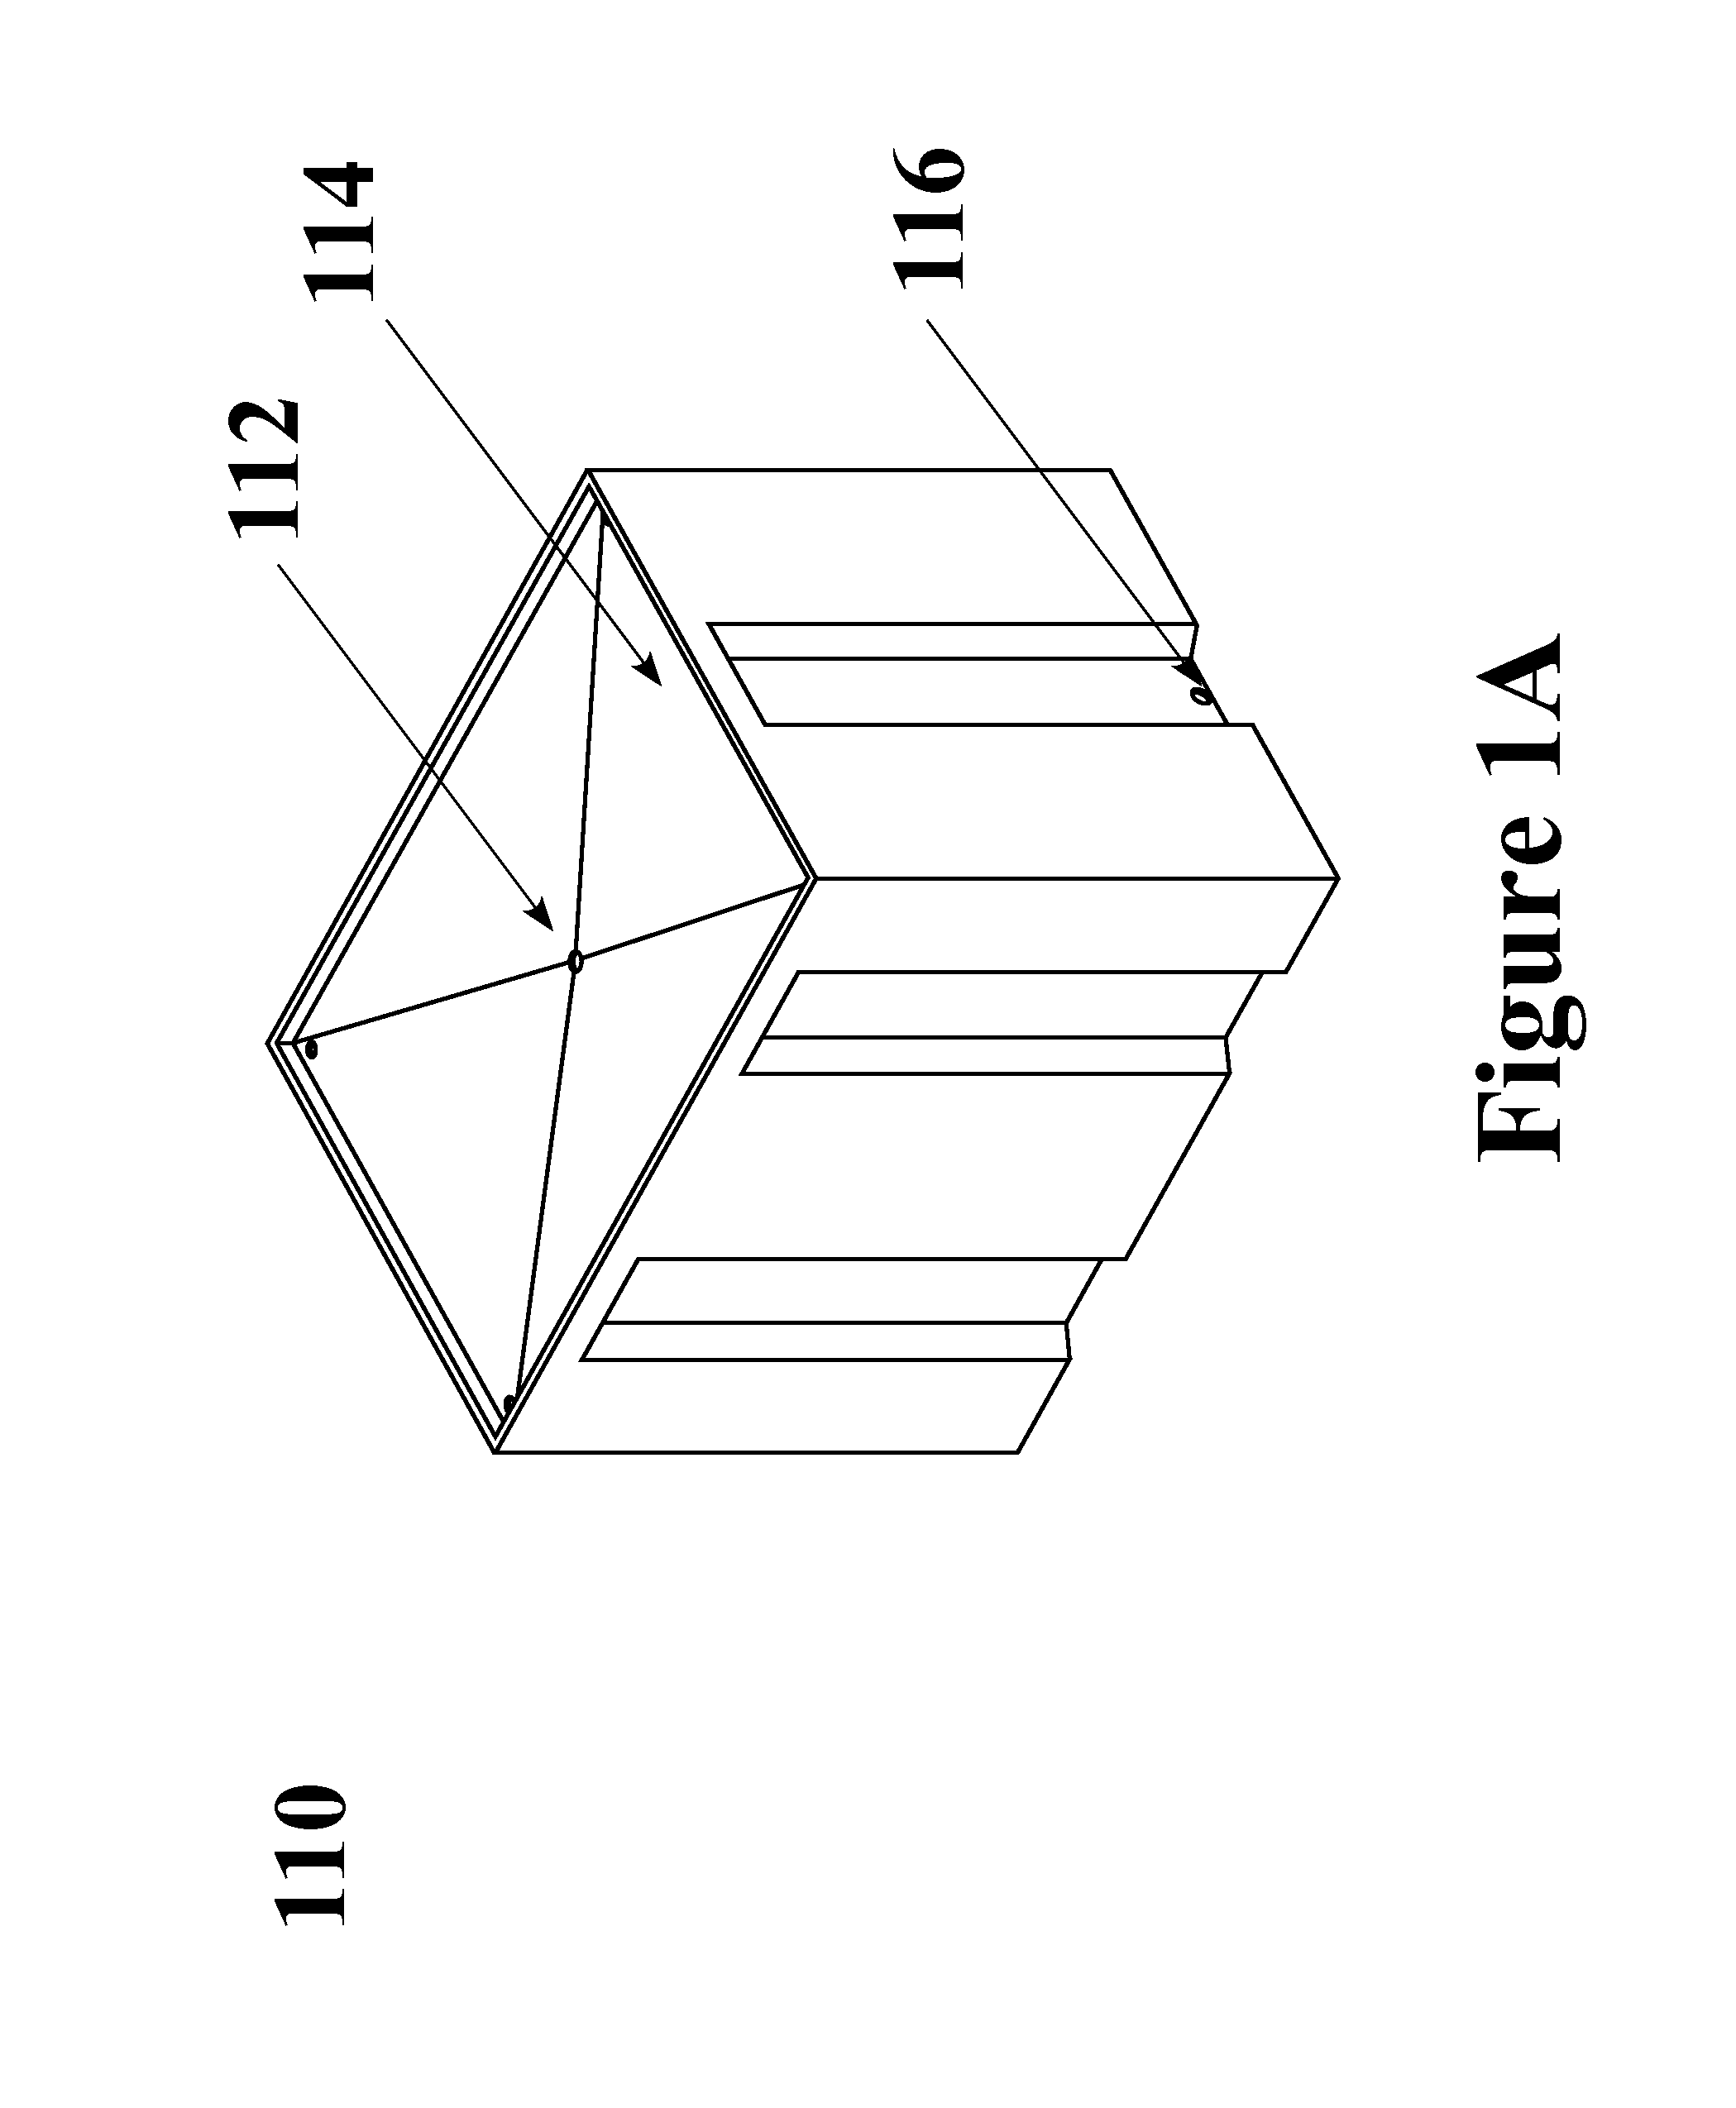 Apparatus and method for vibrational isolation of compounds